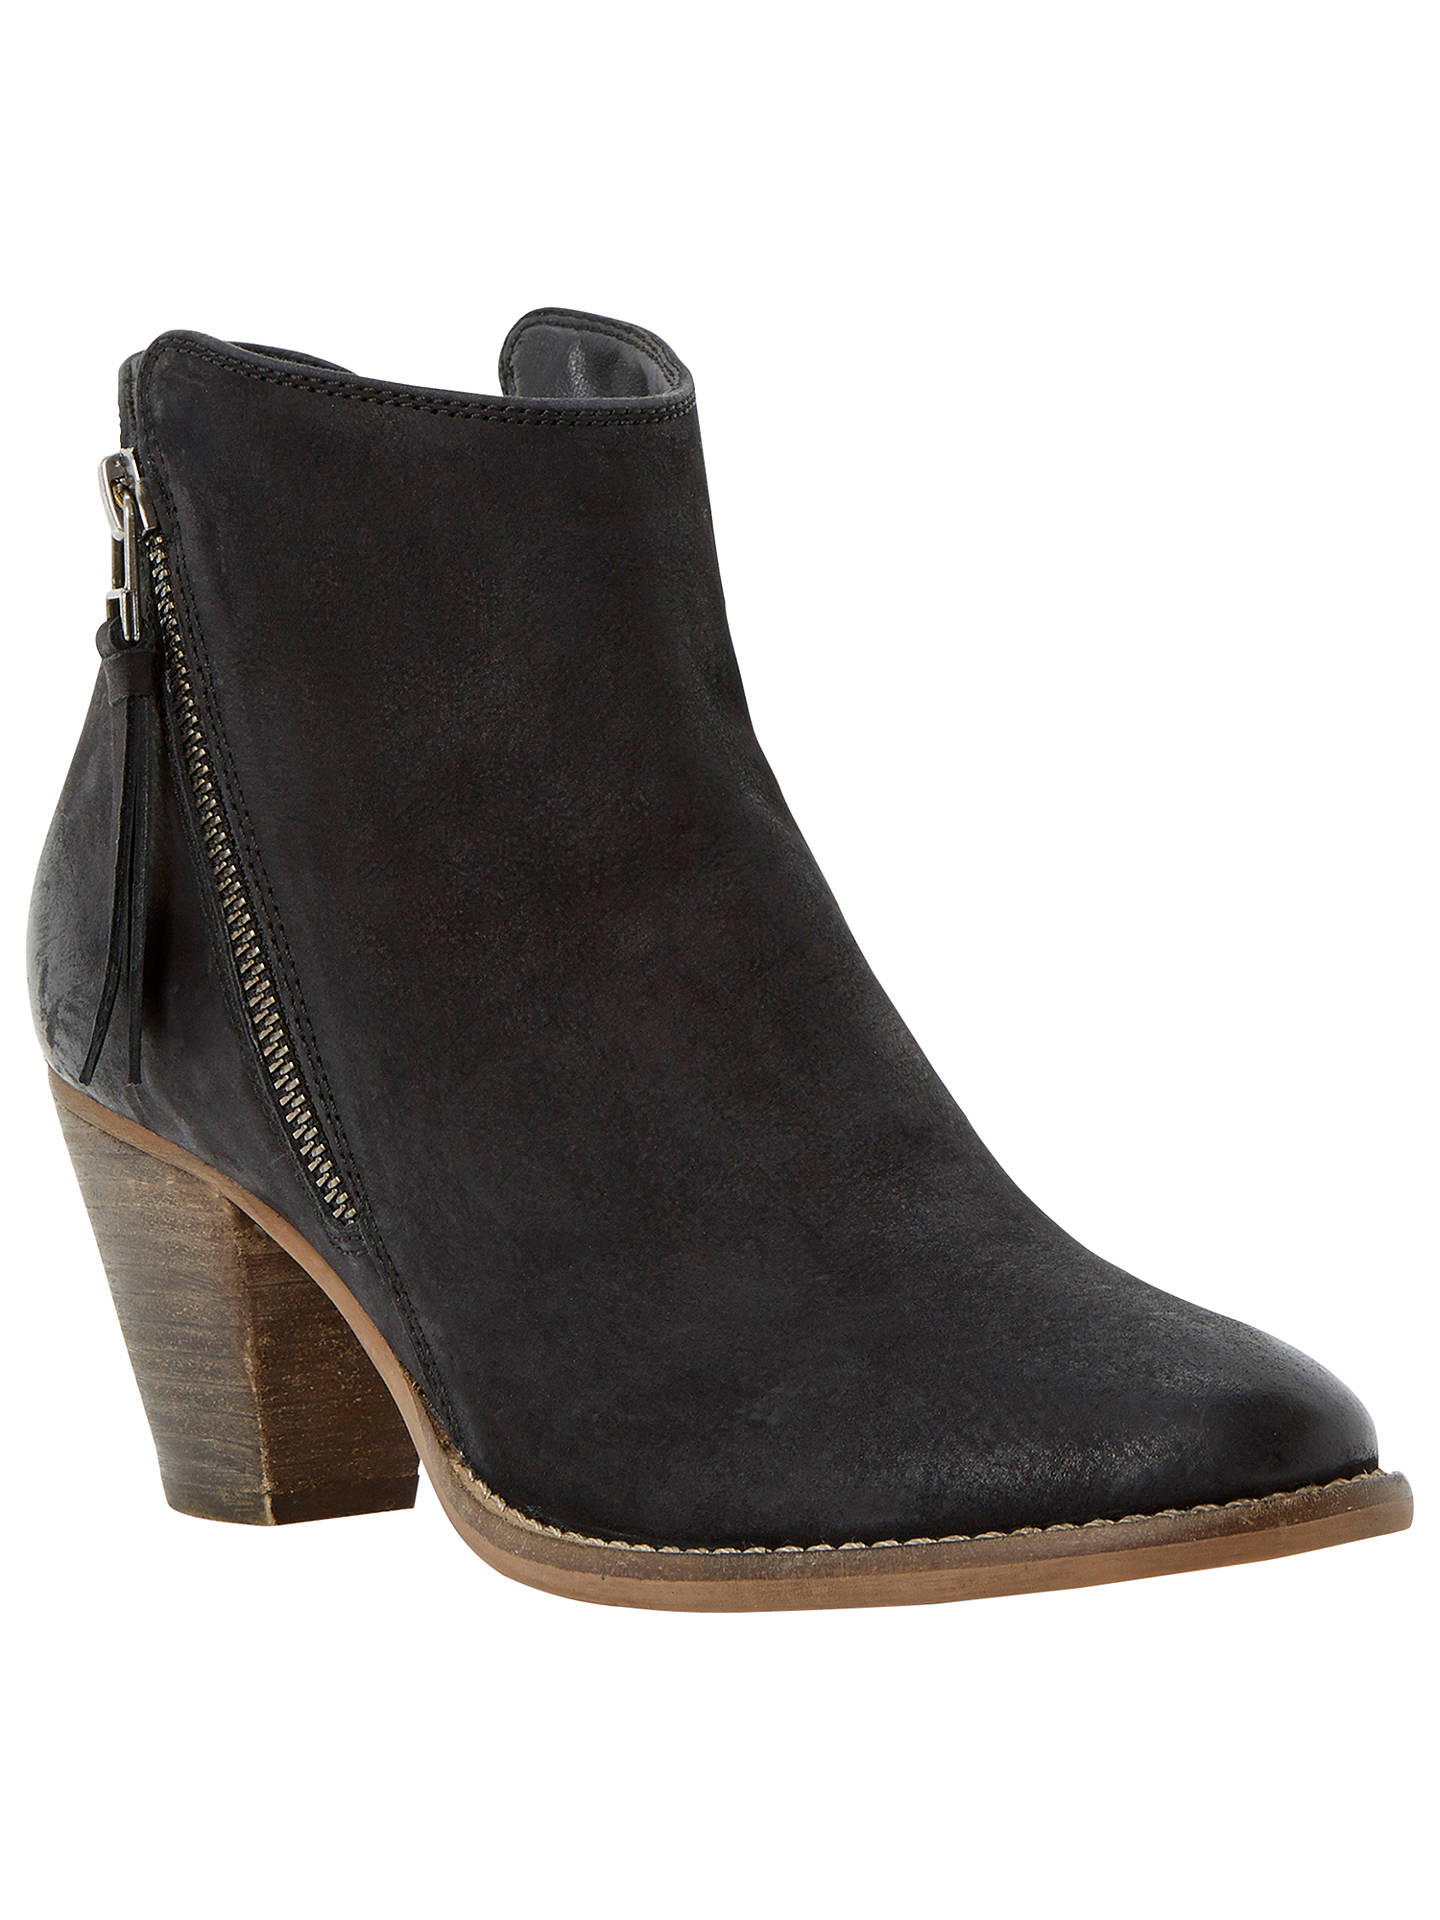 Dune Pollie Leather Ankle Boots, Black at John Lewis & Partners